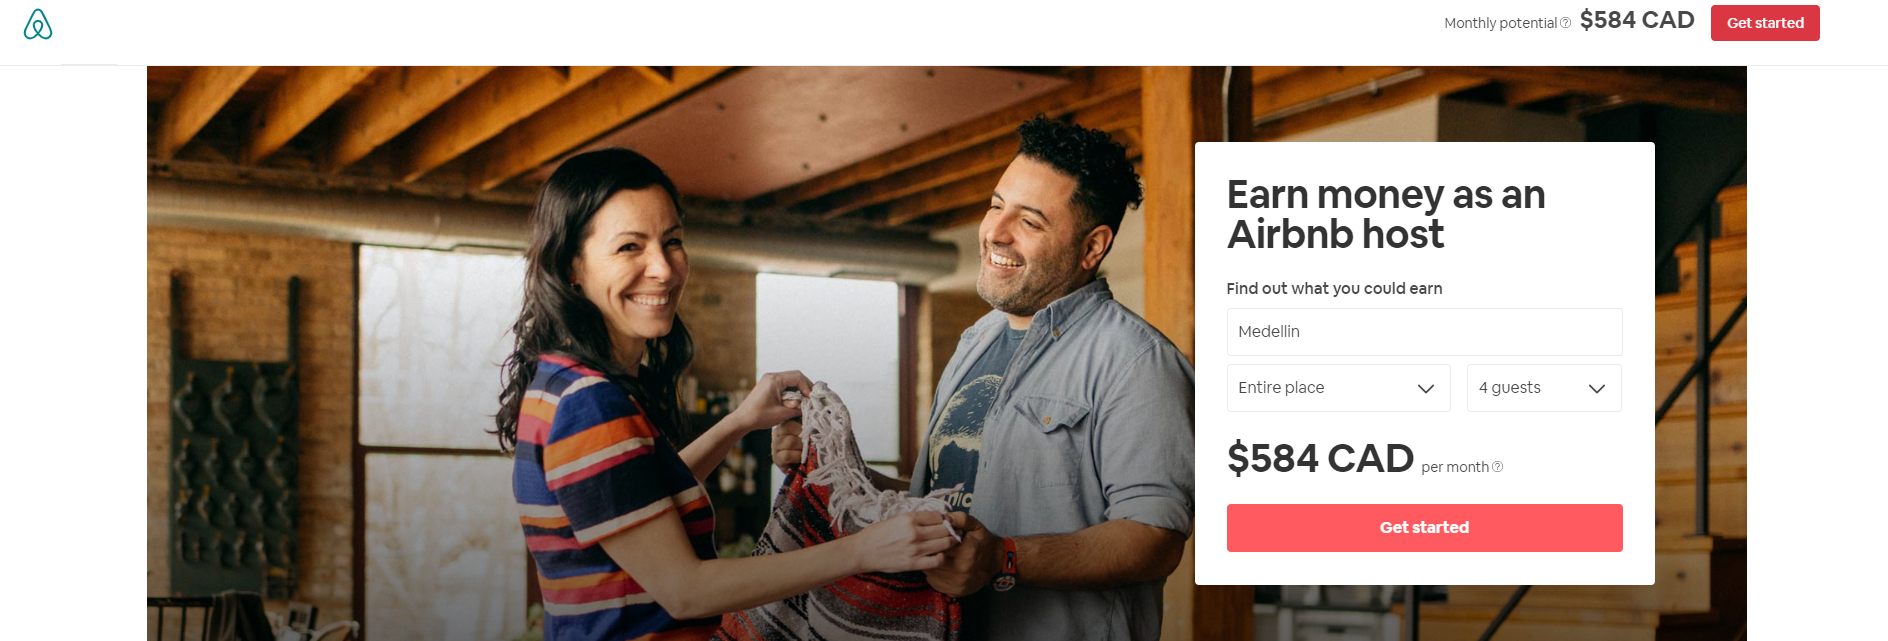 Make-money-with-AirBnB